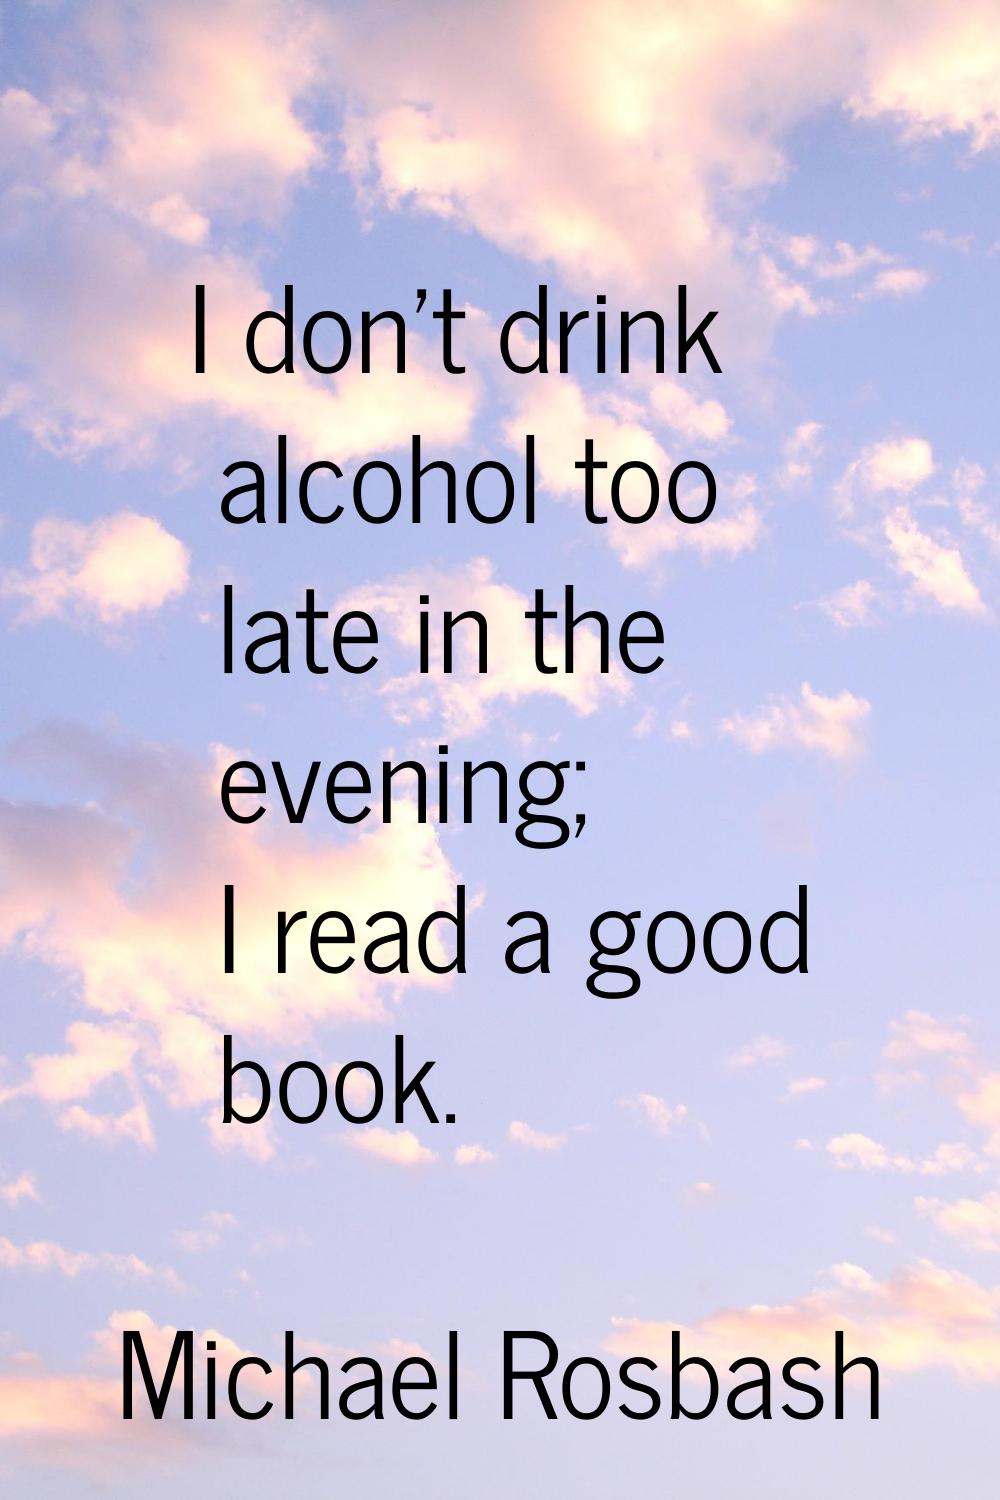 I don't drink alcohol too late in the evening; I read a good book.